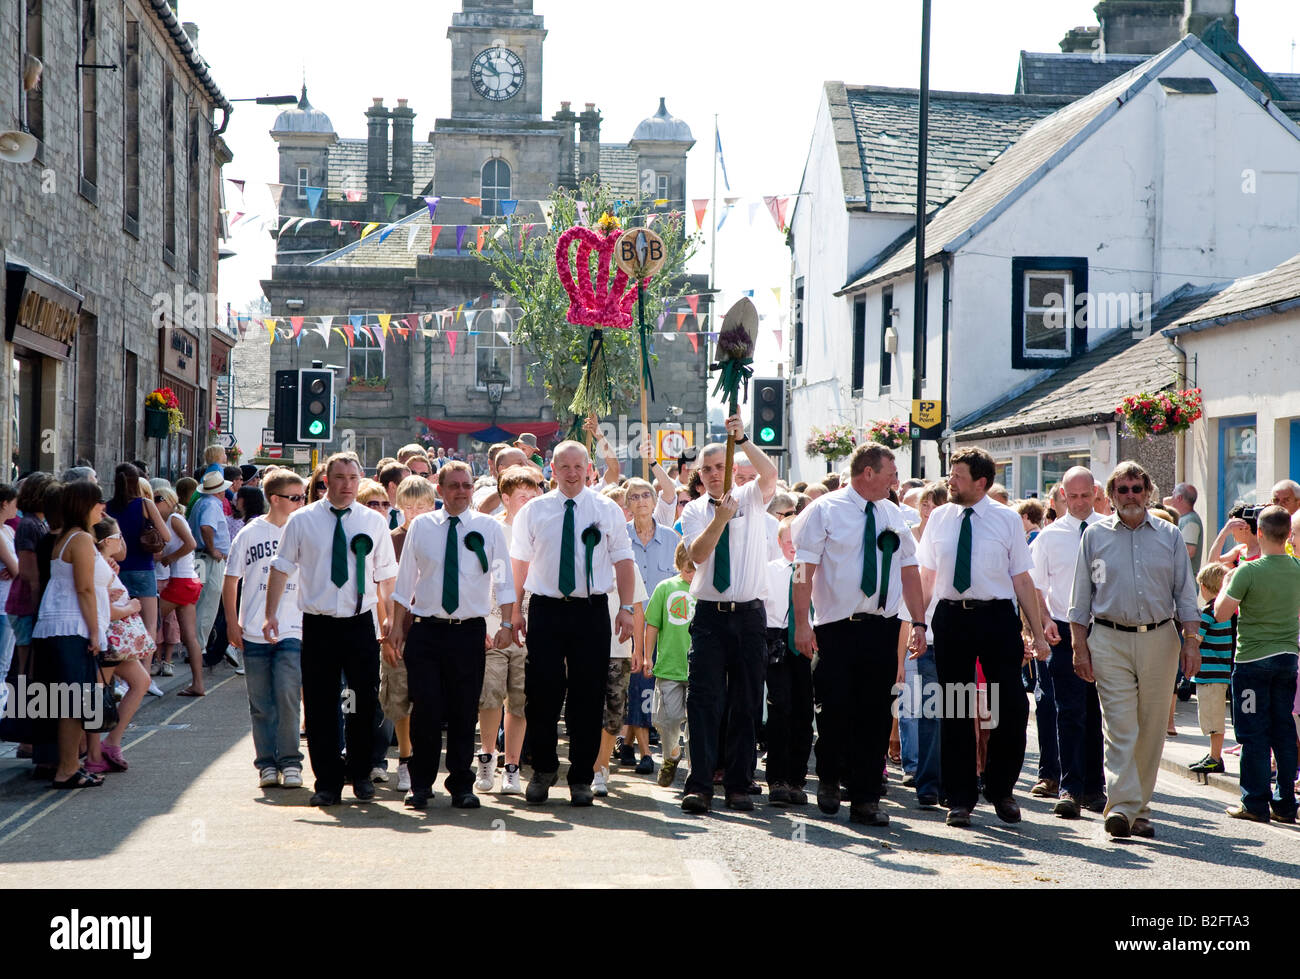 Townspeople Carrying Spade Thistle And Royal Emblems  Langholm Common Riding Langholm Scotland UK Stock Photo